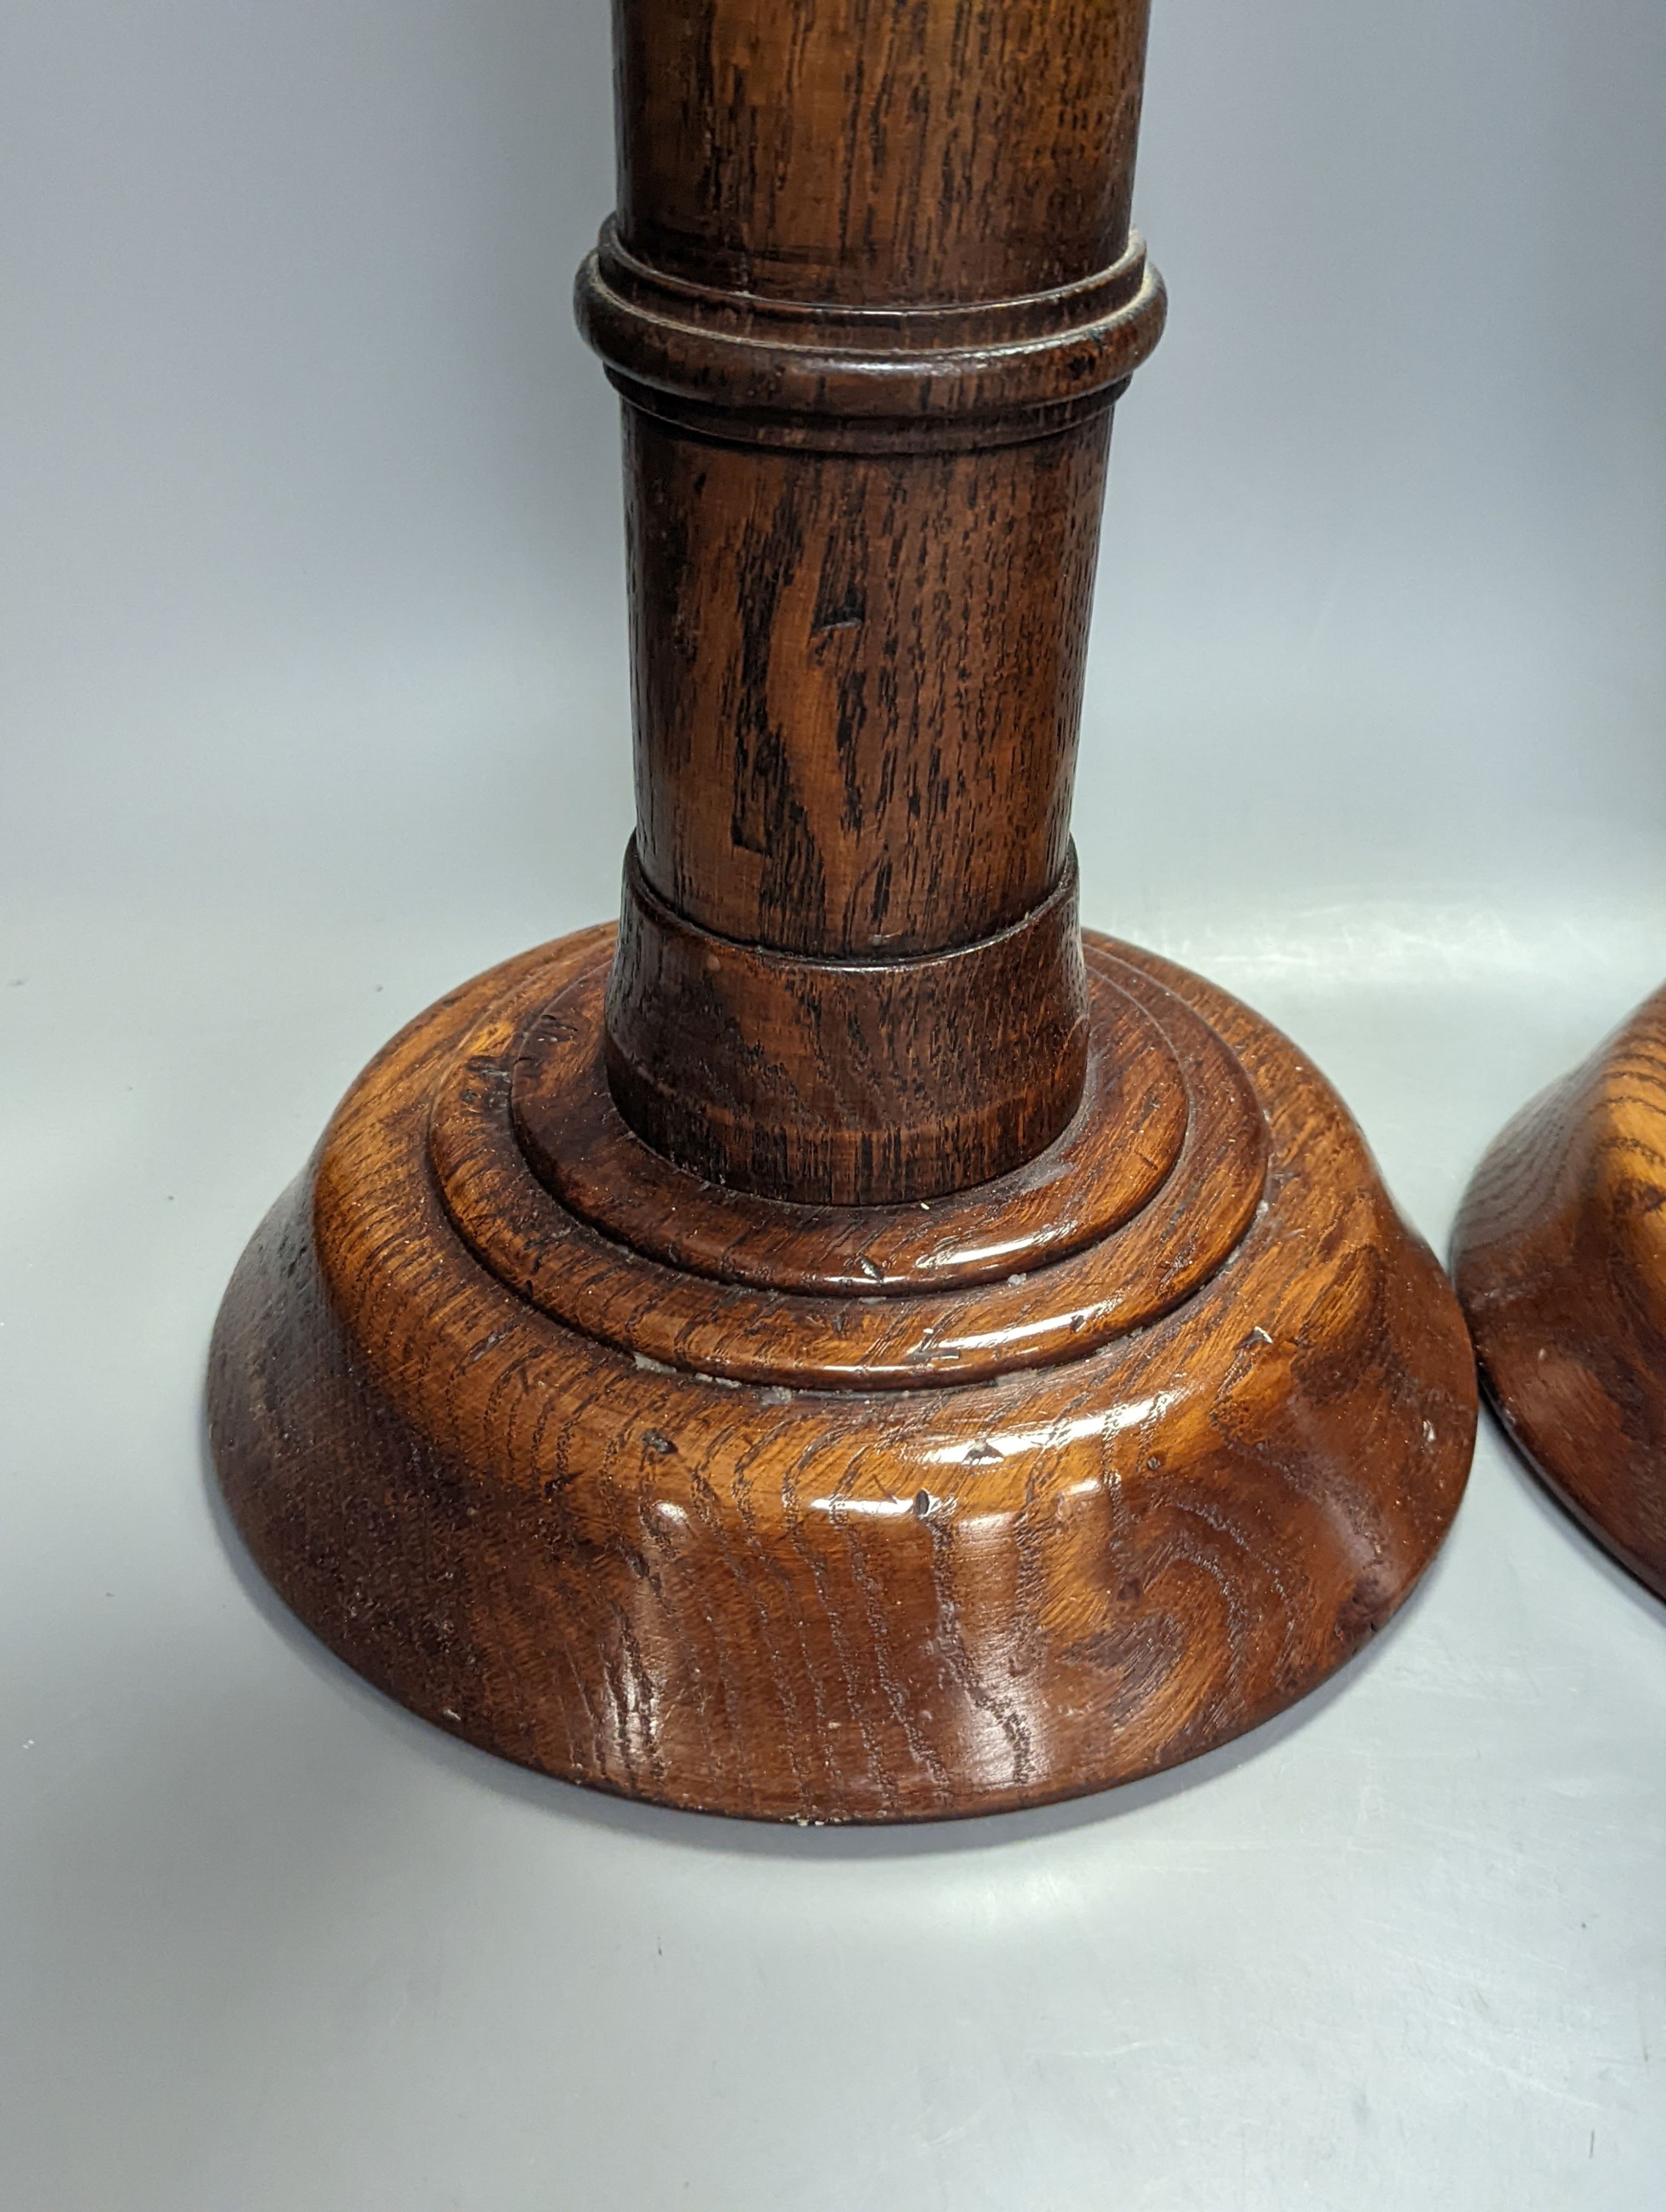 A pair of Pugin inspired Gothic style oak pricket candlesticks, height 56cm